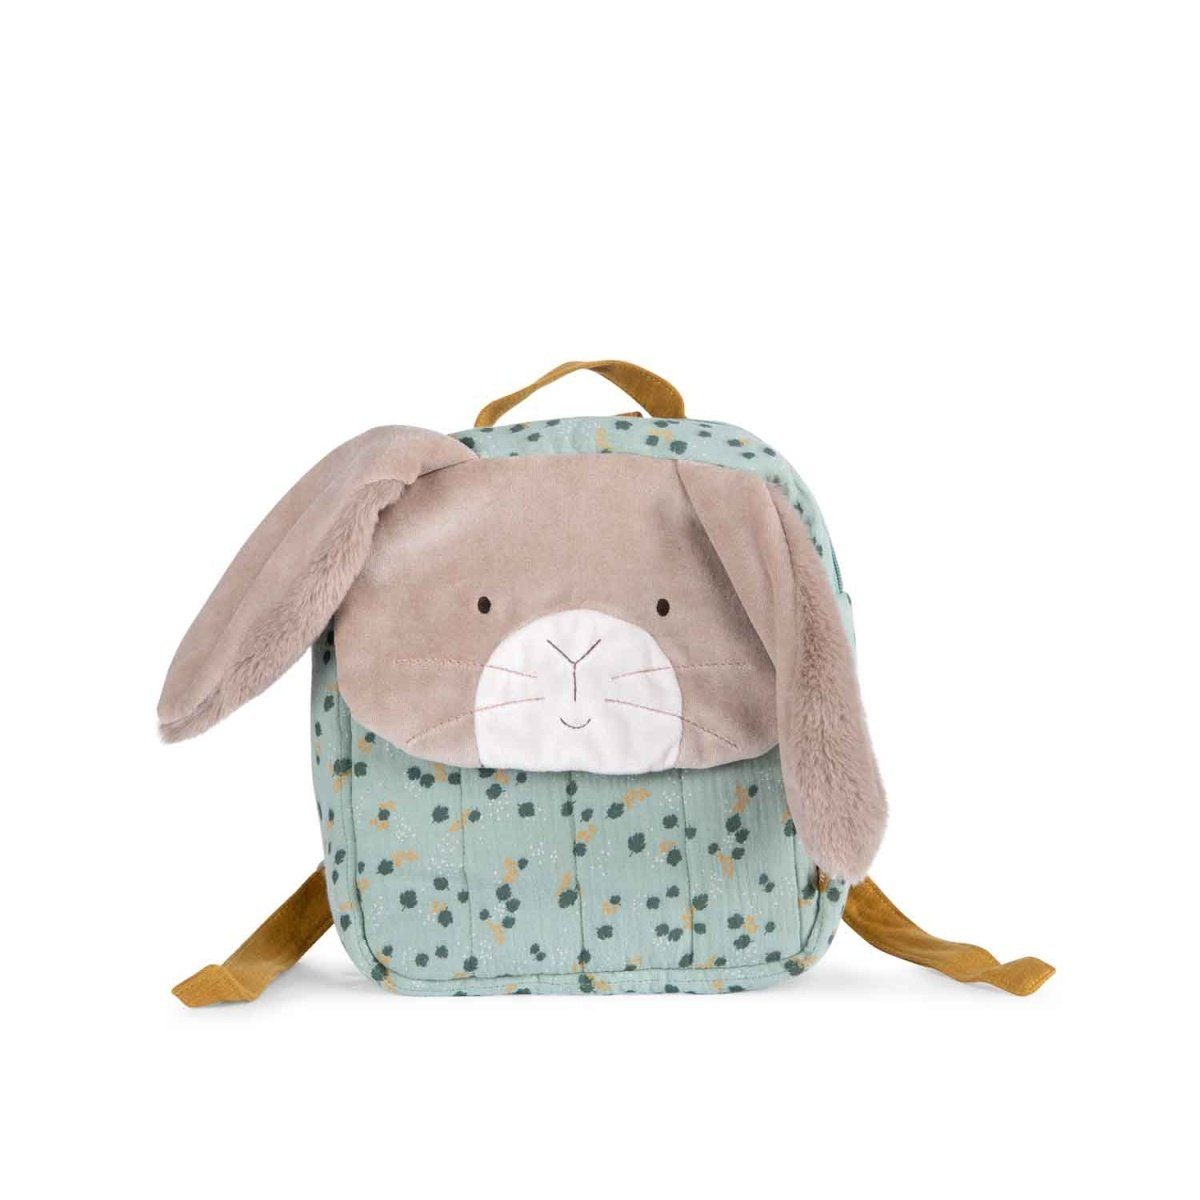 Moulin Roty Kinderrucksack Trois Lapins Rucksack Hase 29cm Kinderrucksack Kindergarten Schule